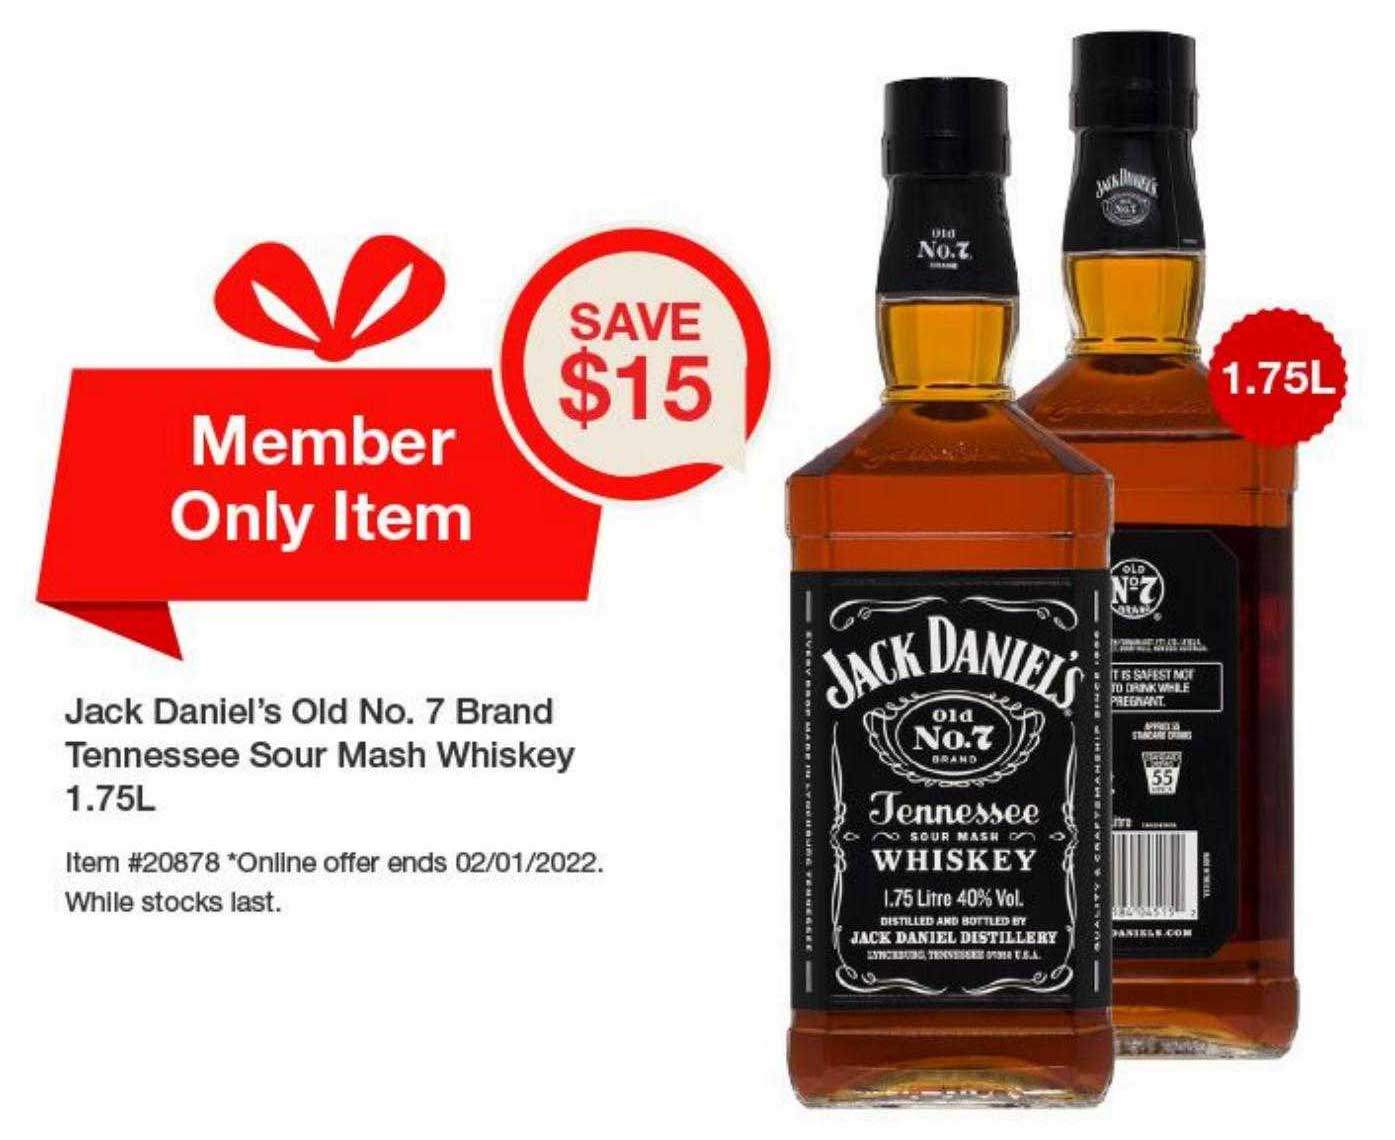 Jack Daniel's Old No. 7 Brand Tennessee Sour Mash Whiskey Offer at Costco